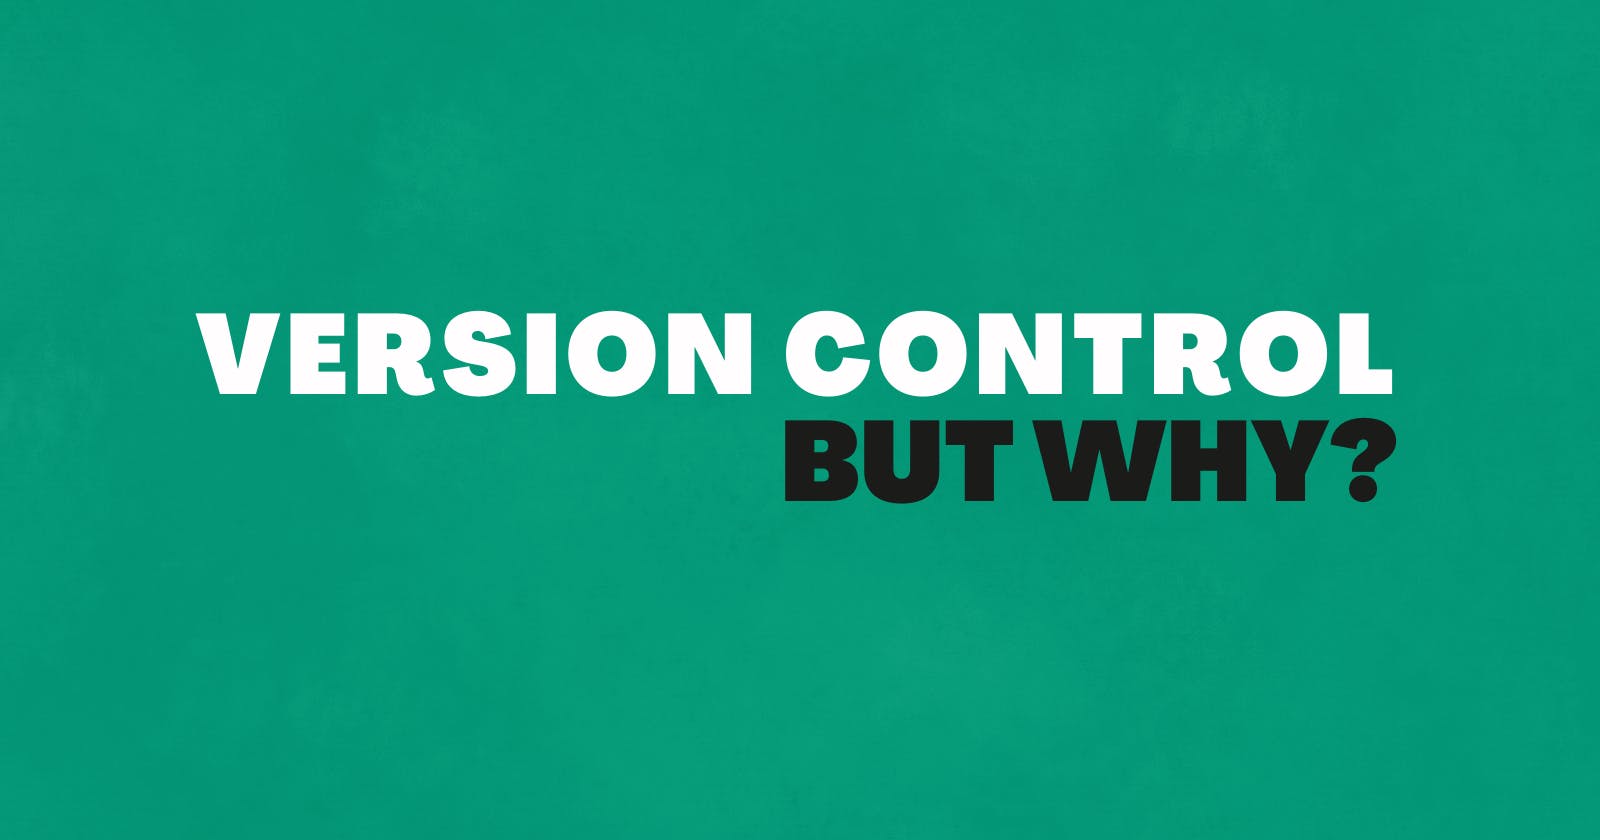 Why Do We Need Version Control?